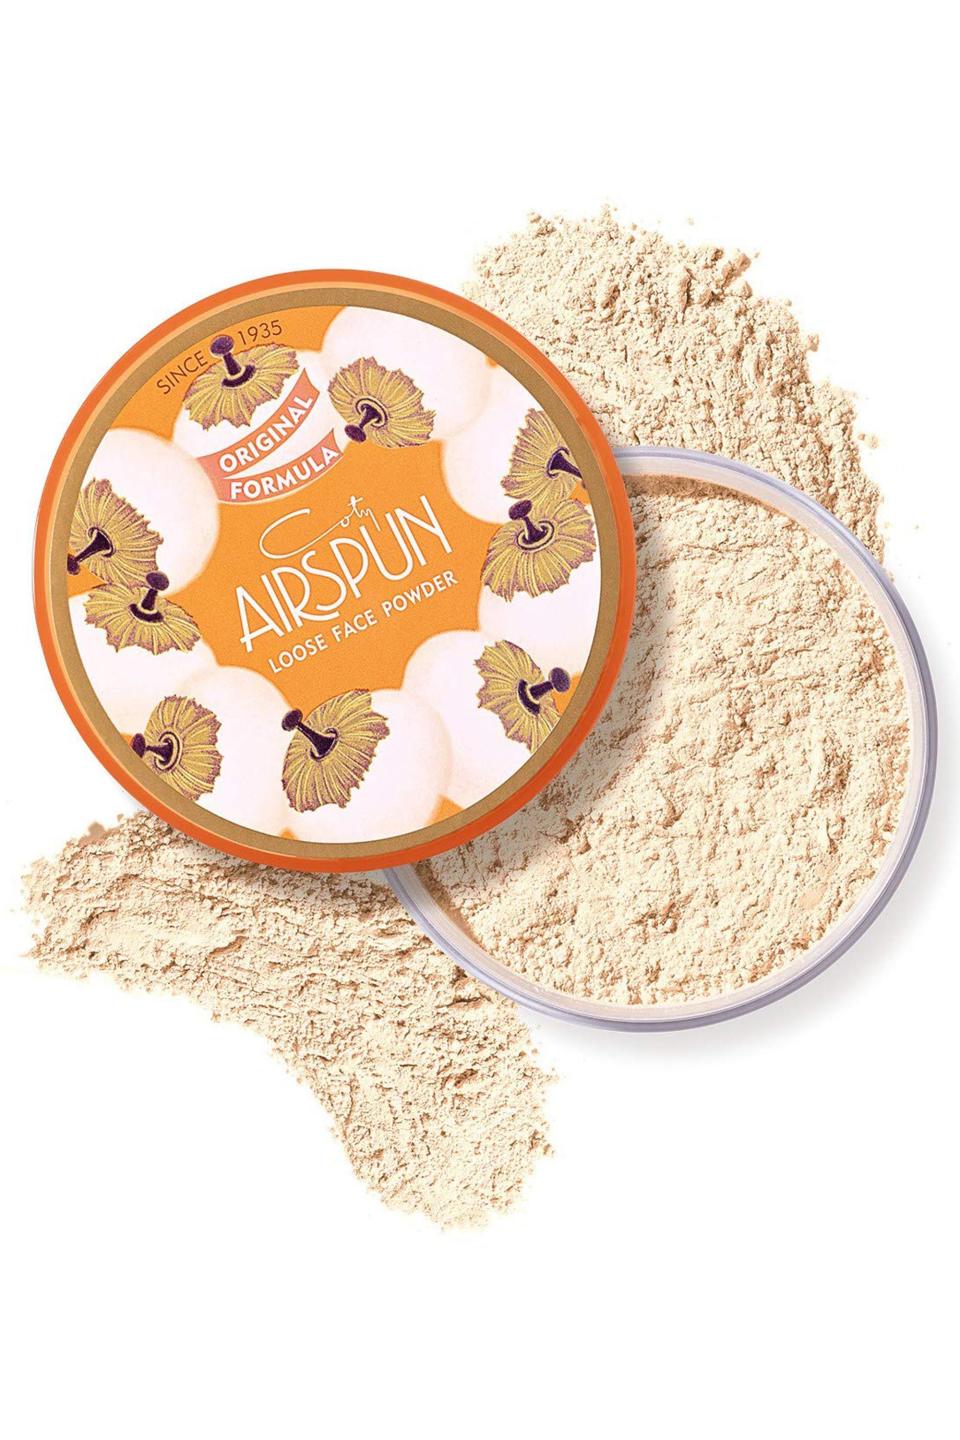 11) Coty Airspun Face Powder in Naturally Neutral